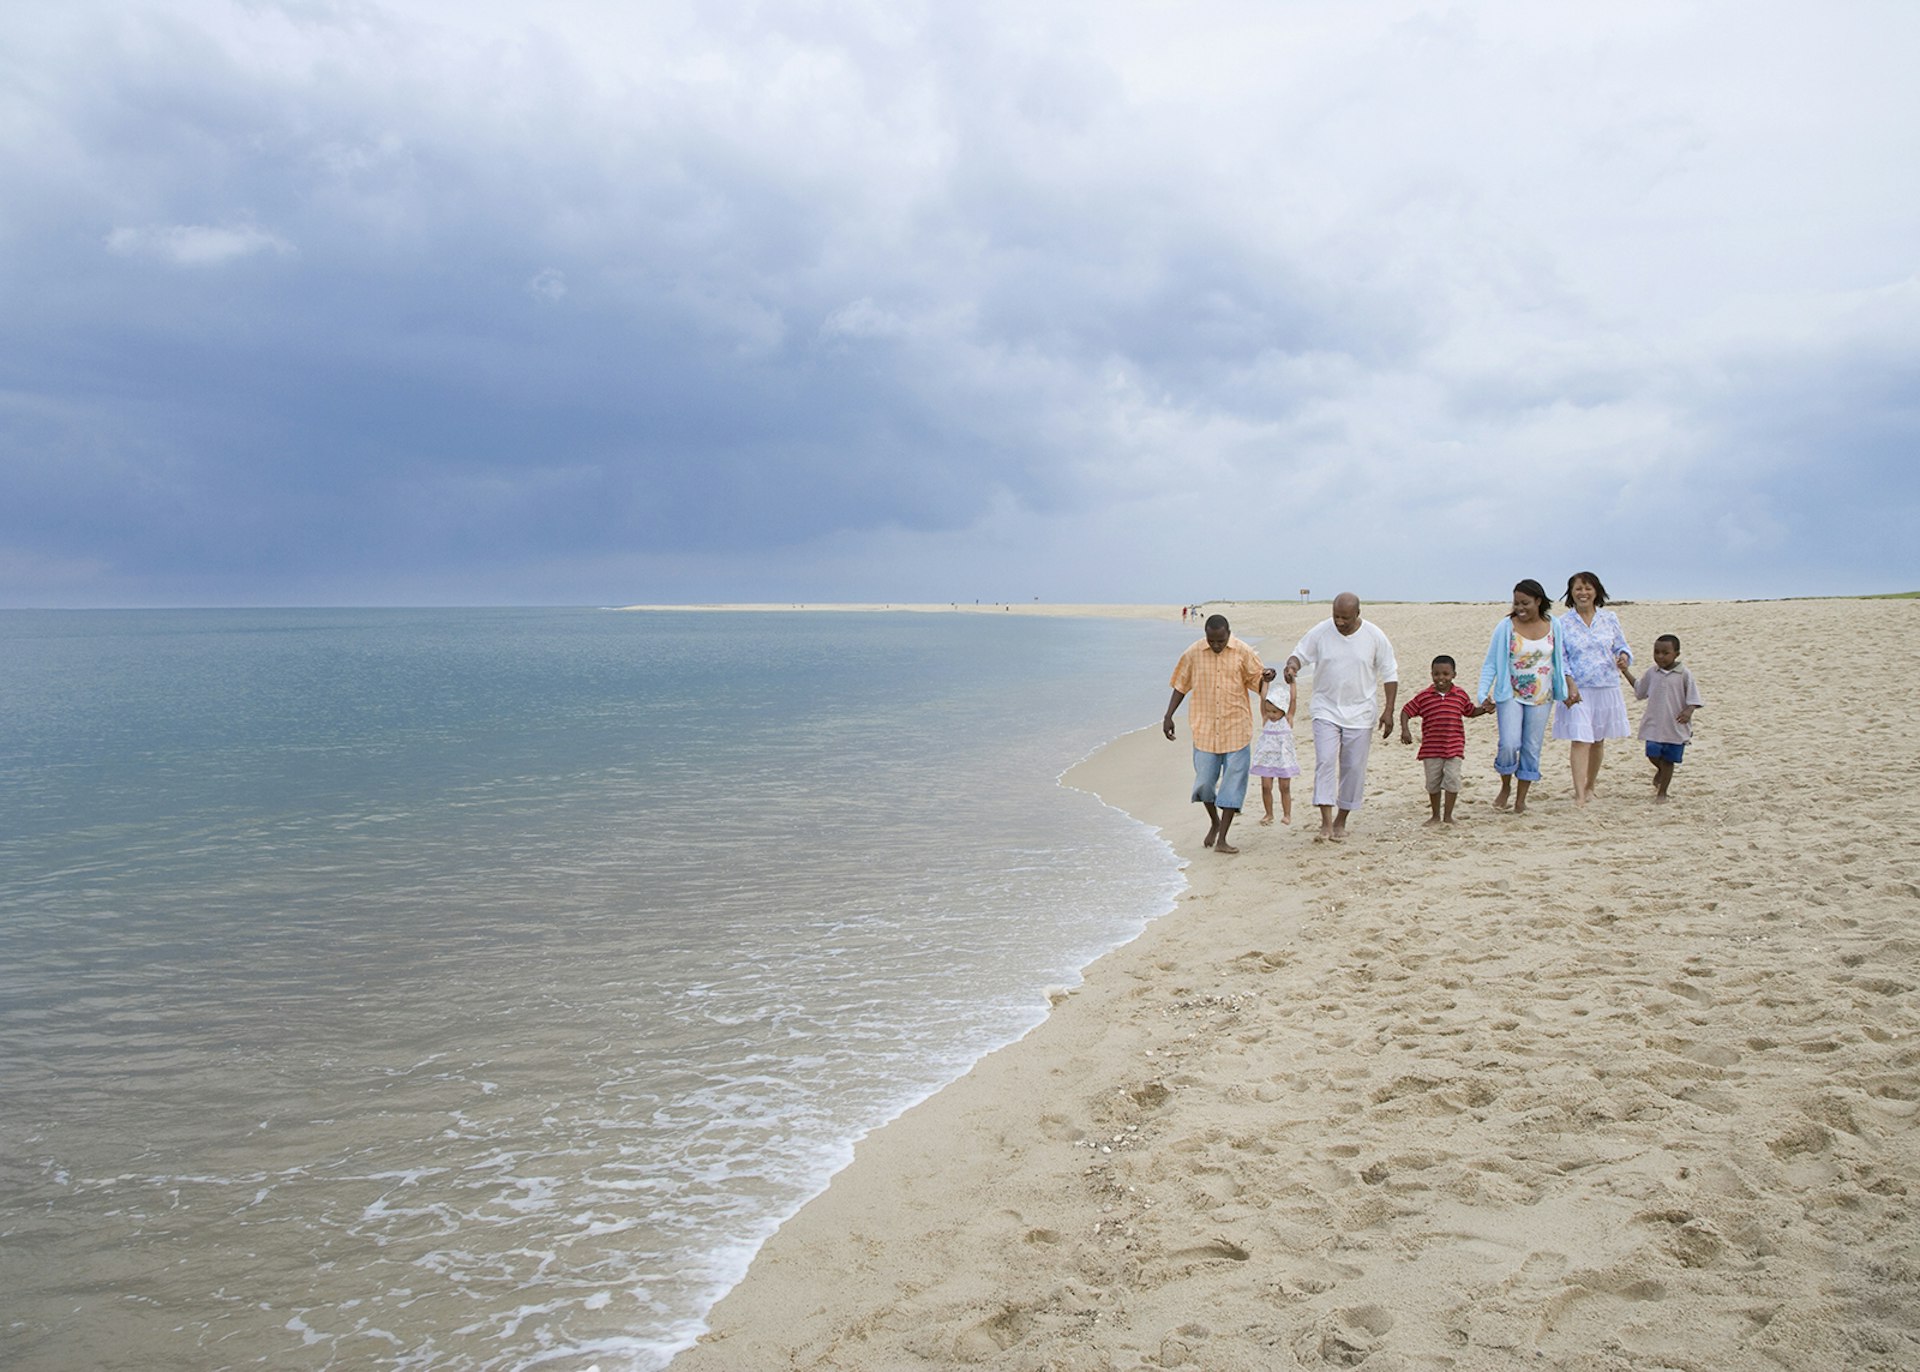 A three-generation family strolling along the beach © Jack Hollingsworth / Getty Images